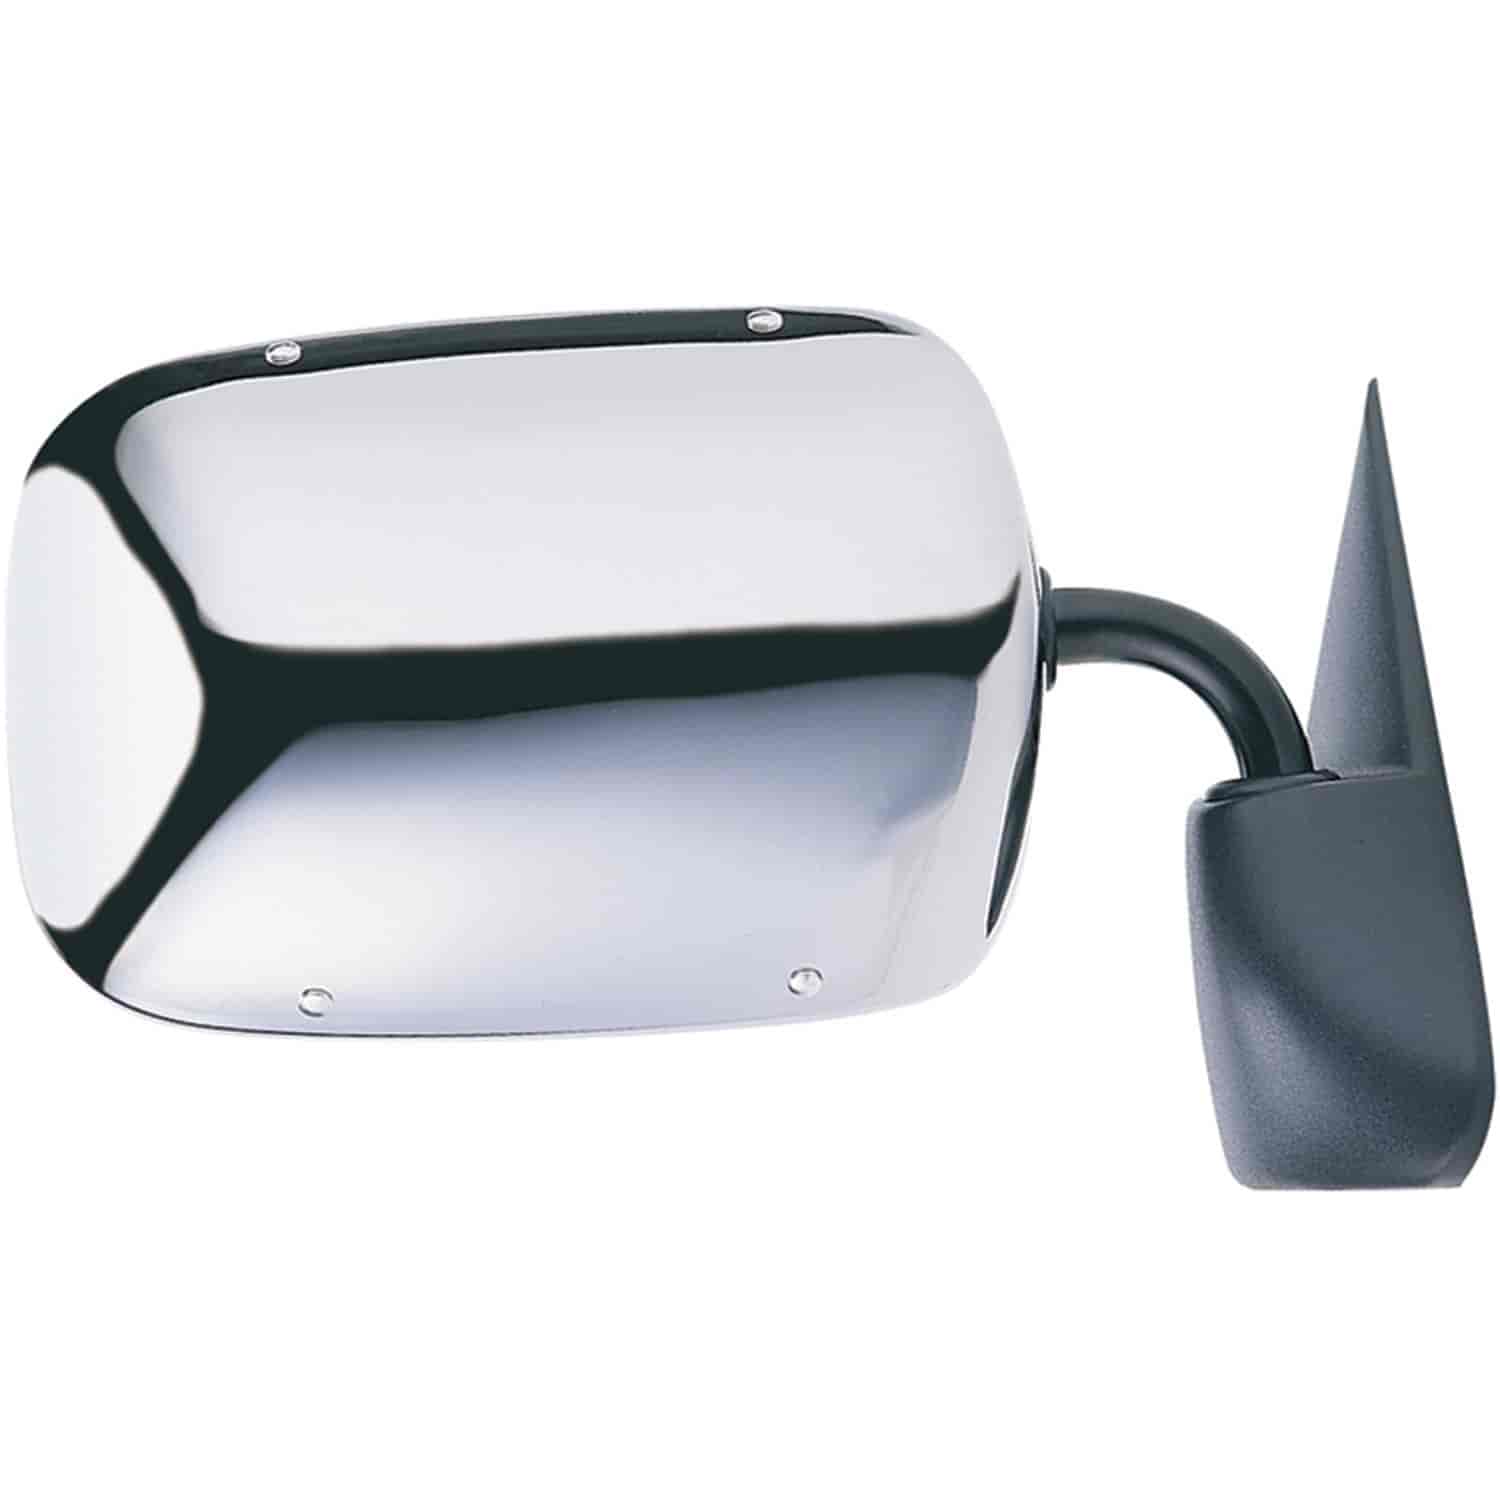 OEM Style Replacement mirror for 94-97 Dodge Pick-Up passenger side mirror tested to fit and functio